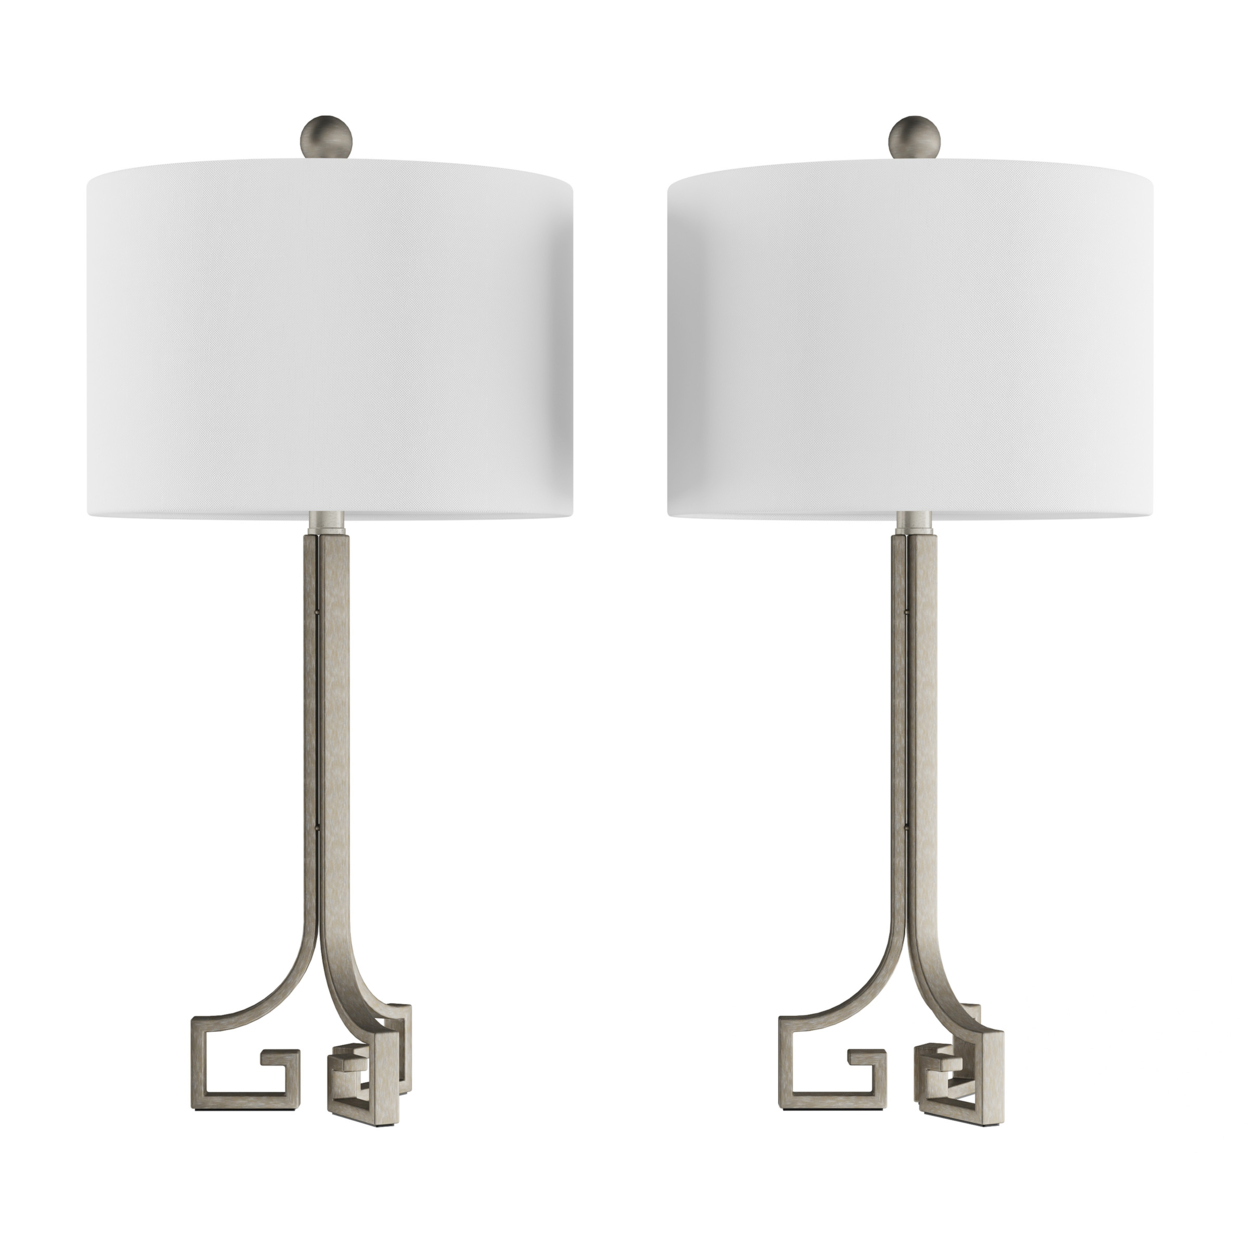 Greek Key Table Lamps-Set Of 2 Modern Lights With LED Bulbs-Antique Silver With Ivory Shades